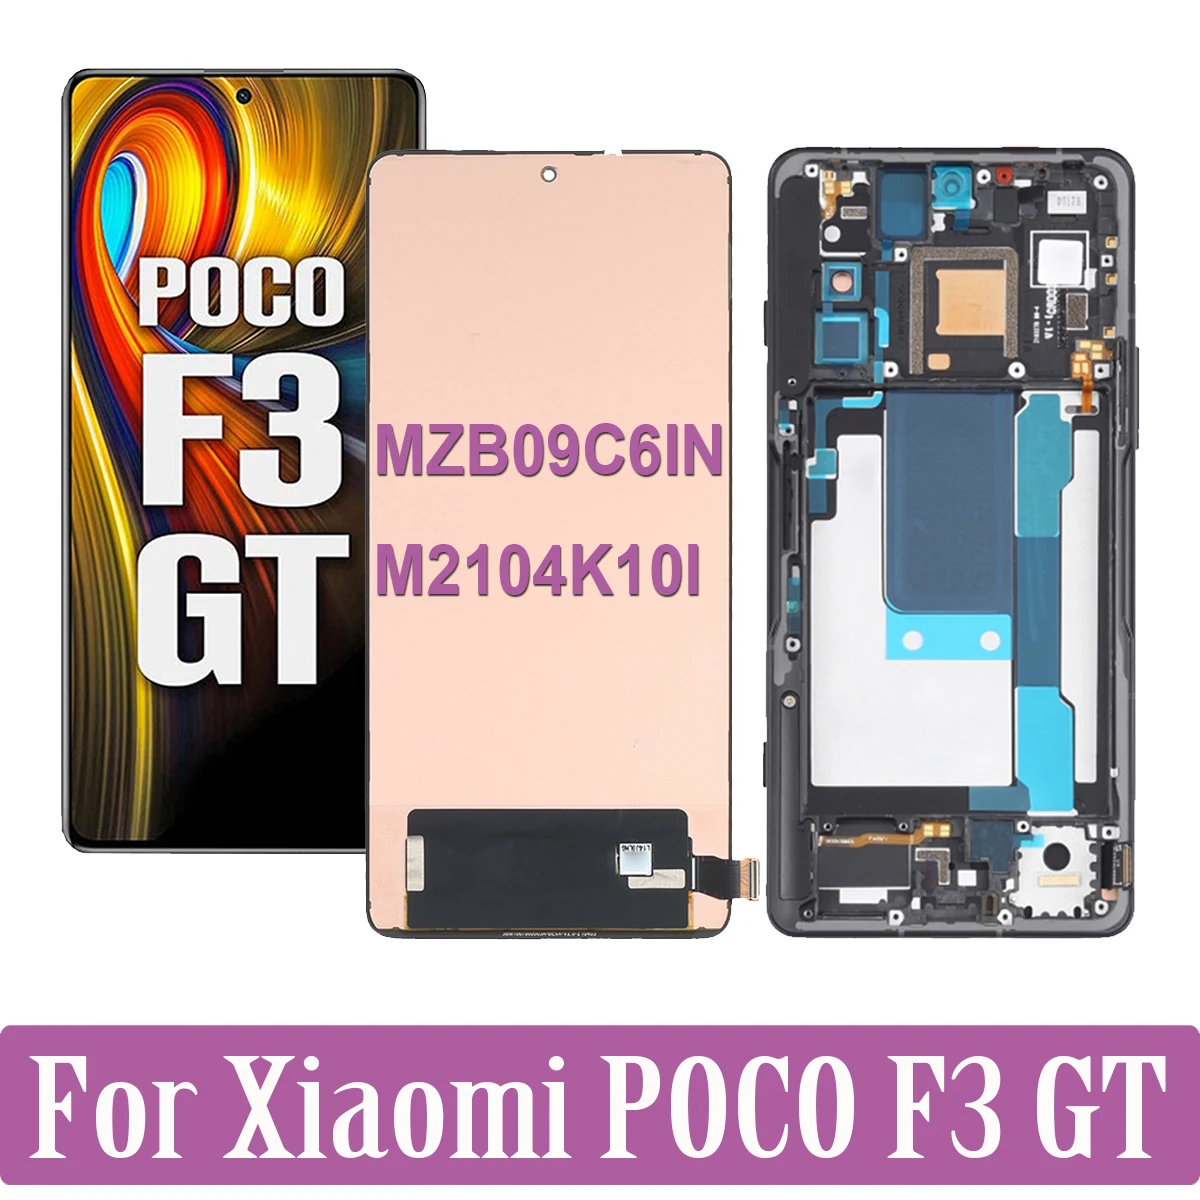 Original 6.67'' AMOLED Display For Xiaomi POCO F3 GT MZB09C6IN M2104K10I LCD Display Touch Screen Replacement Digitizer Assembly enlarge